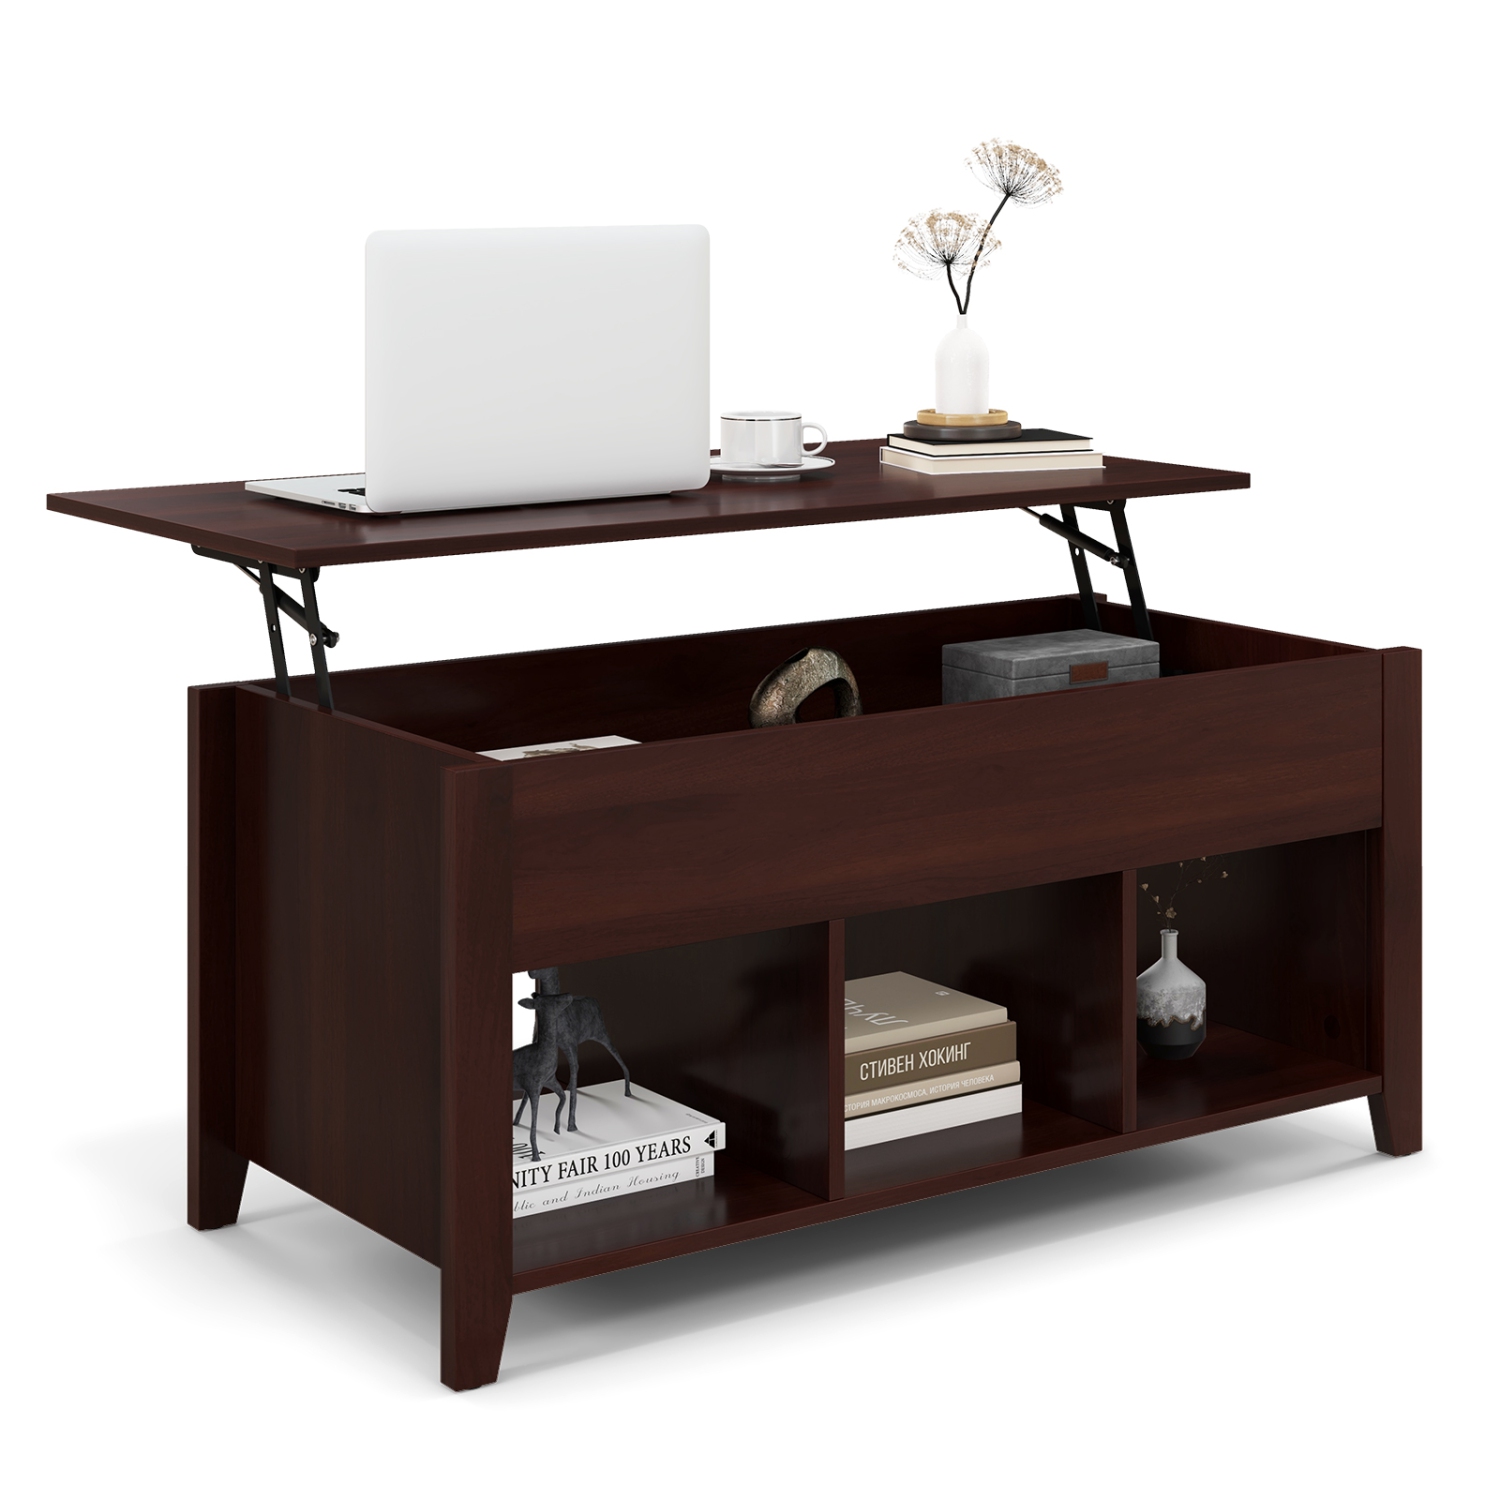 Topbuy Lift Up Coffee Table, Rising Center Table with Lift Top Hidden Compartment & 3 Cubes Modern Dining Accent Table Furniture Brown